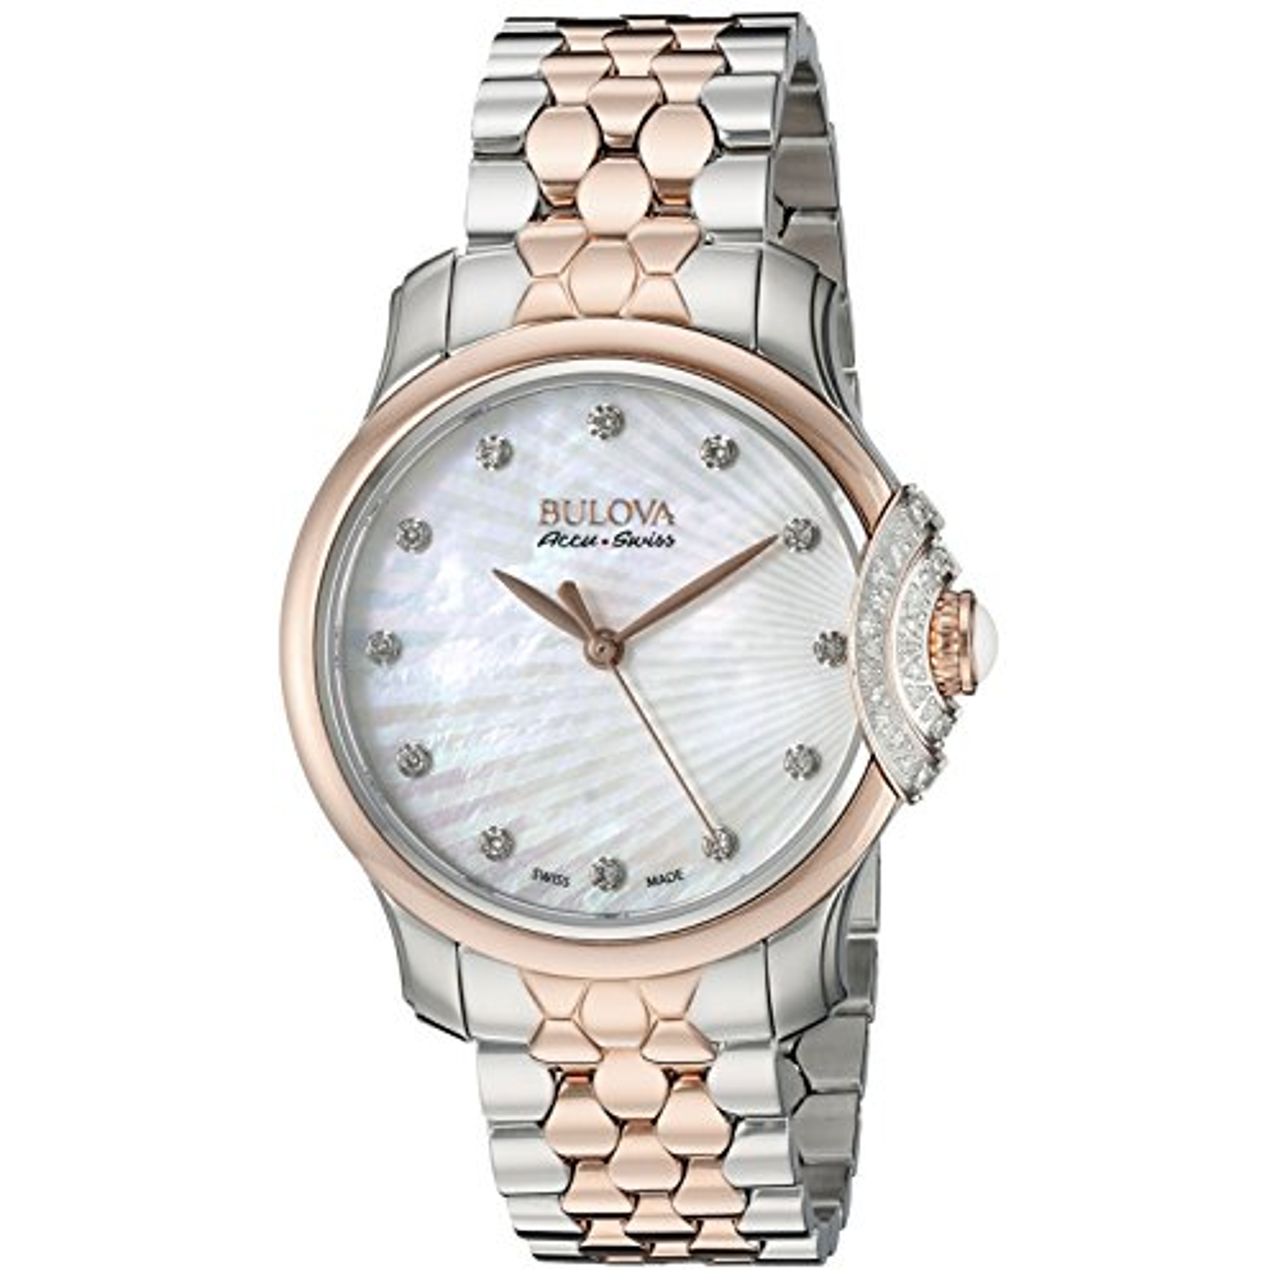 Bulova 65R164 Womens Mop Dial Analog Quartz Watch with Stainless Steel Strap